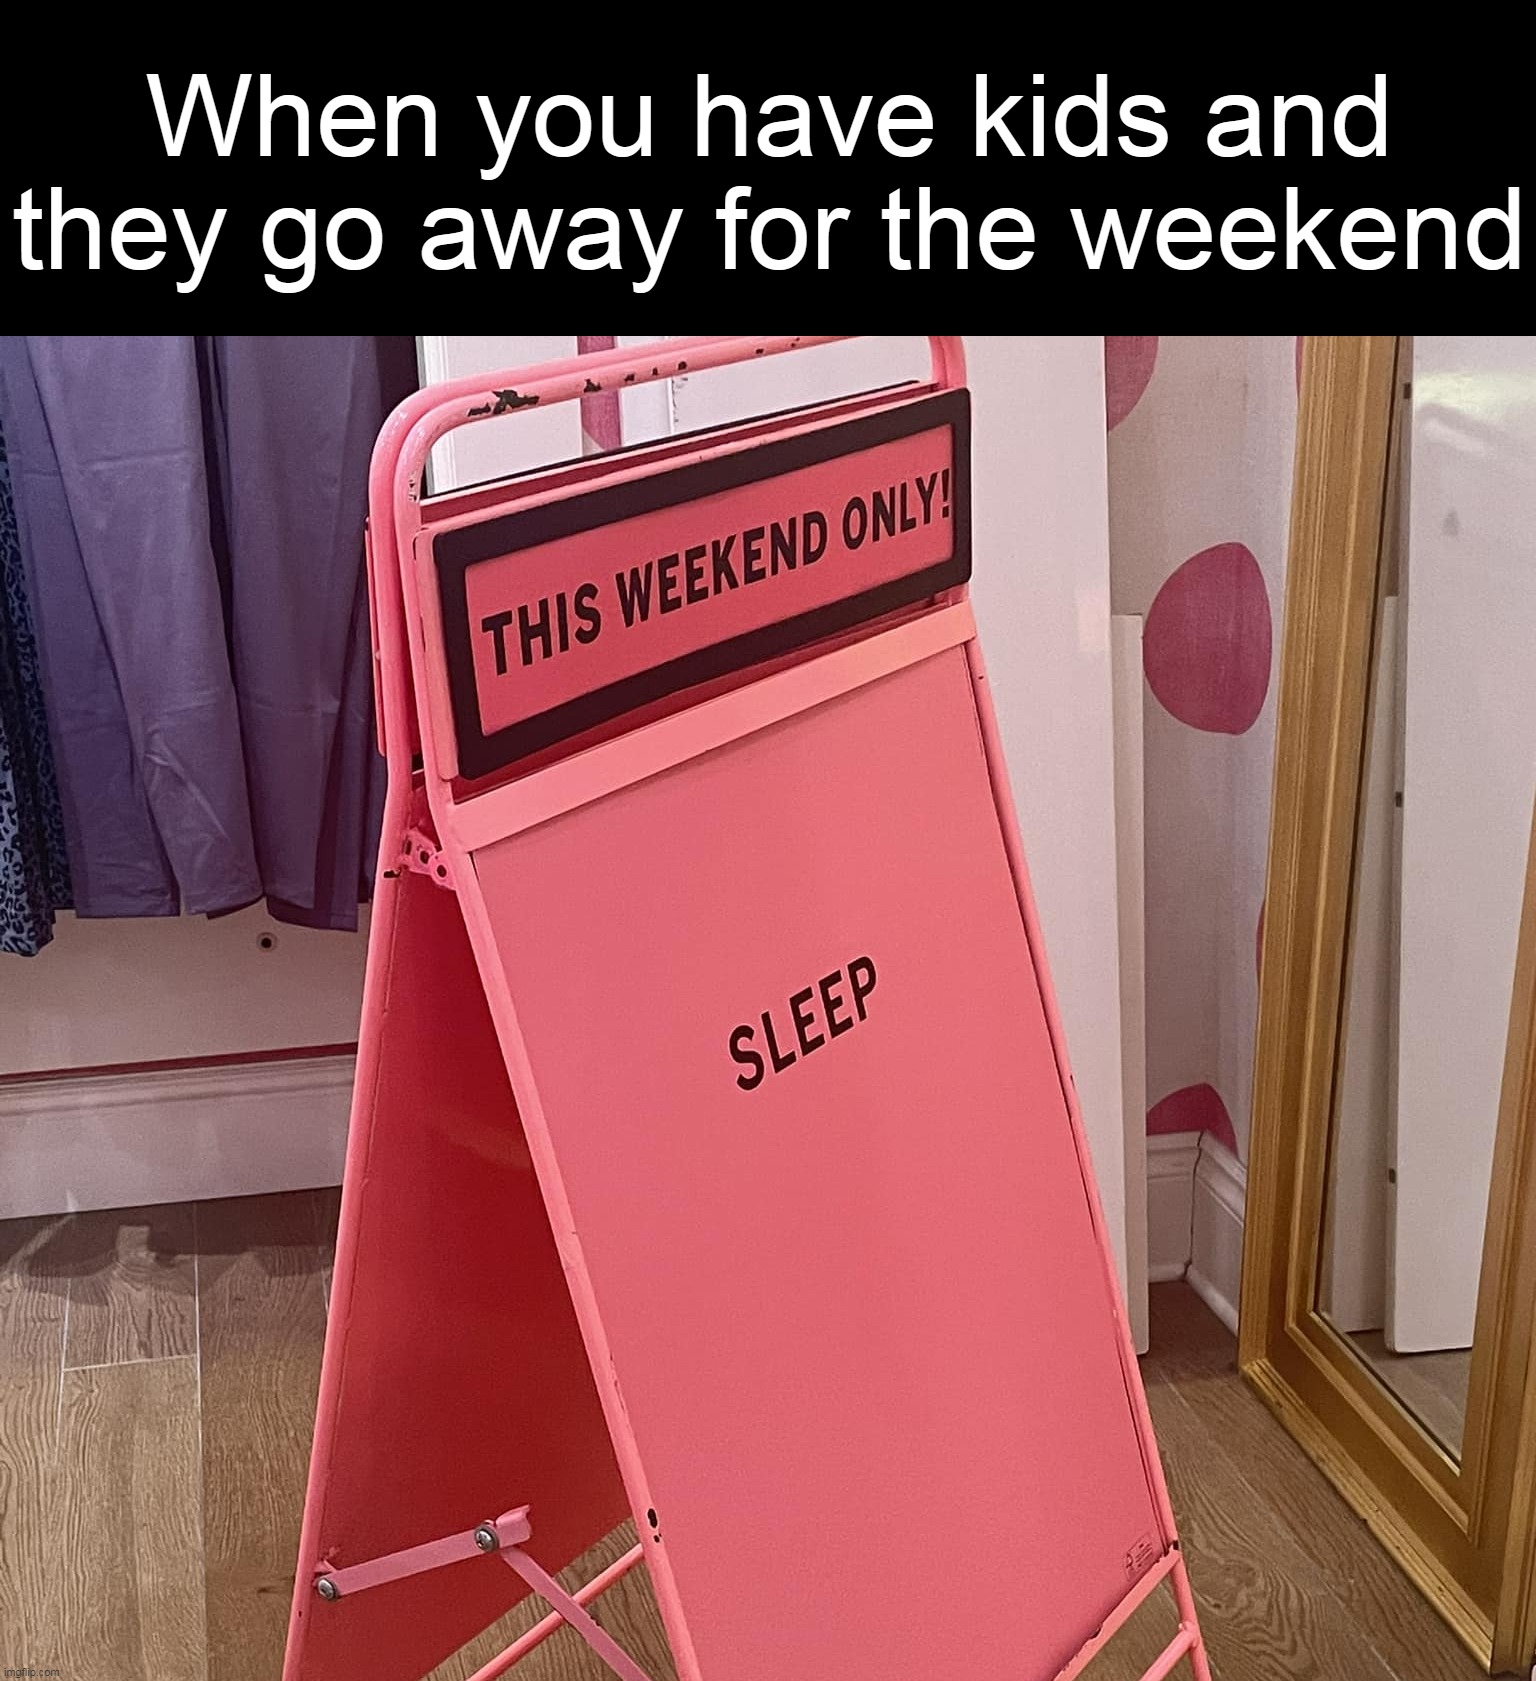 When you have kids and they go away for the weekend | image tagged in meme,memes,humor,signs,funny,relatable | made w/ Imgflip meme maker